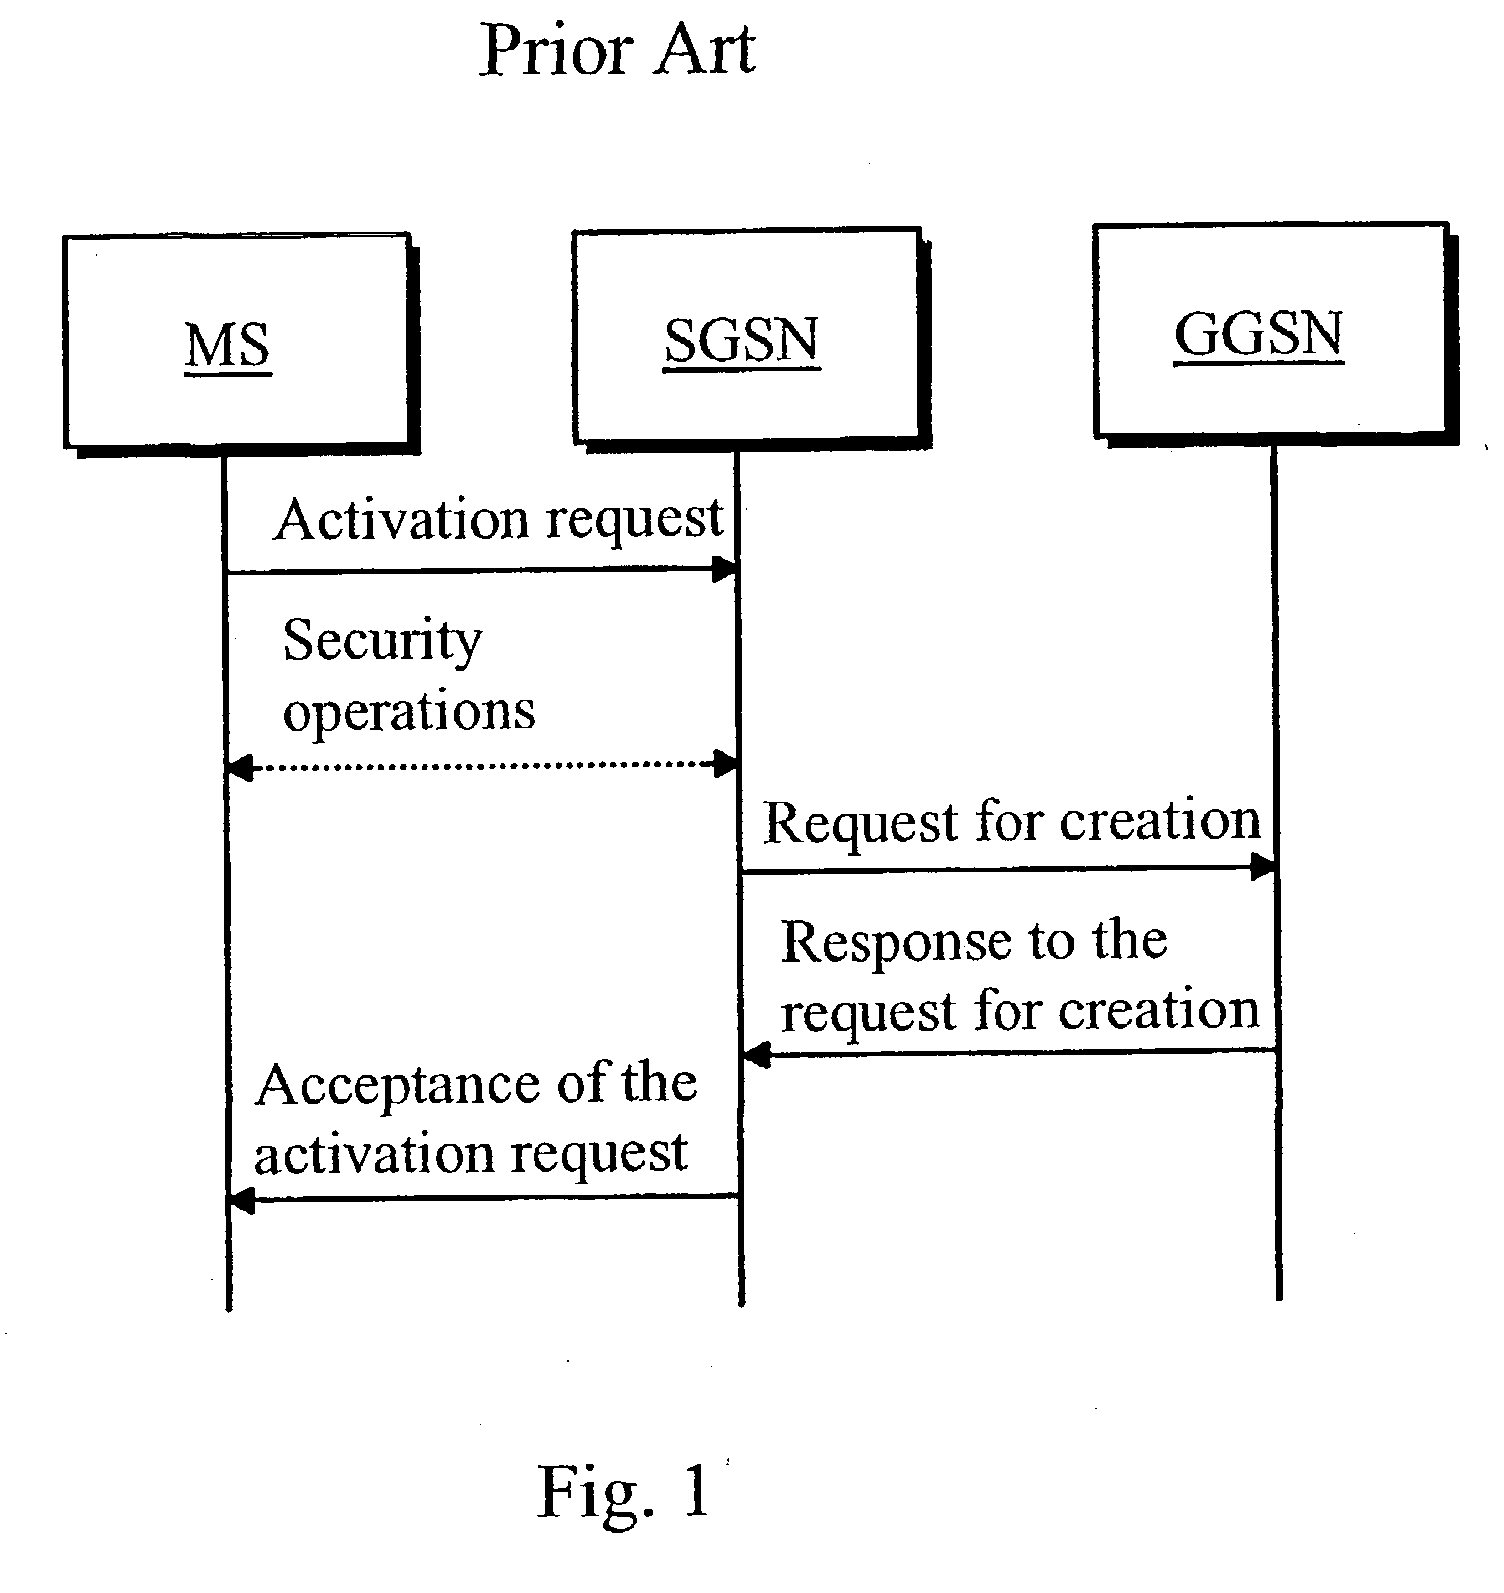 Prepaid service in a packet-switched mobile communication network